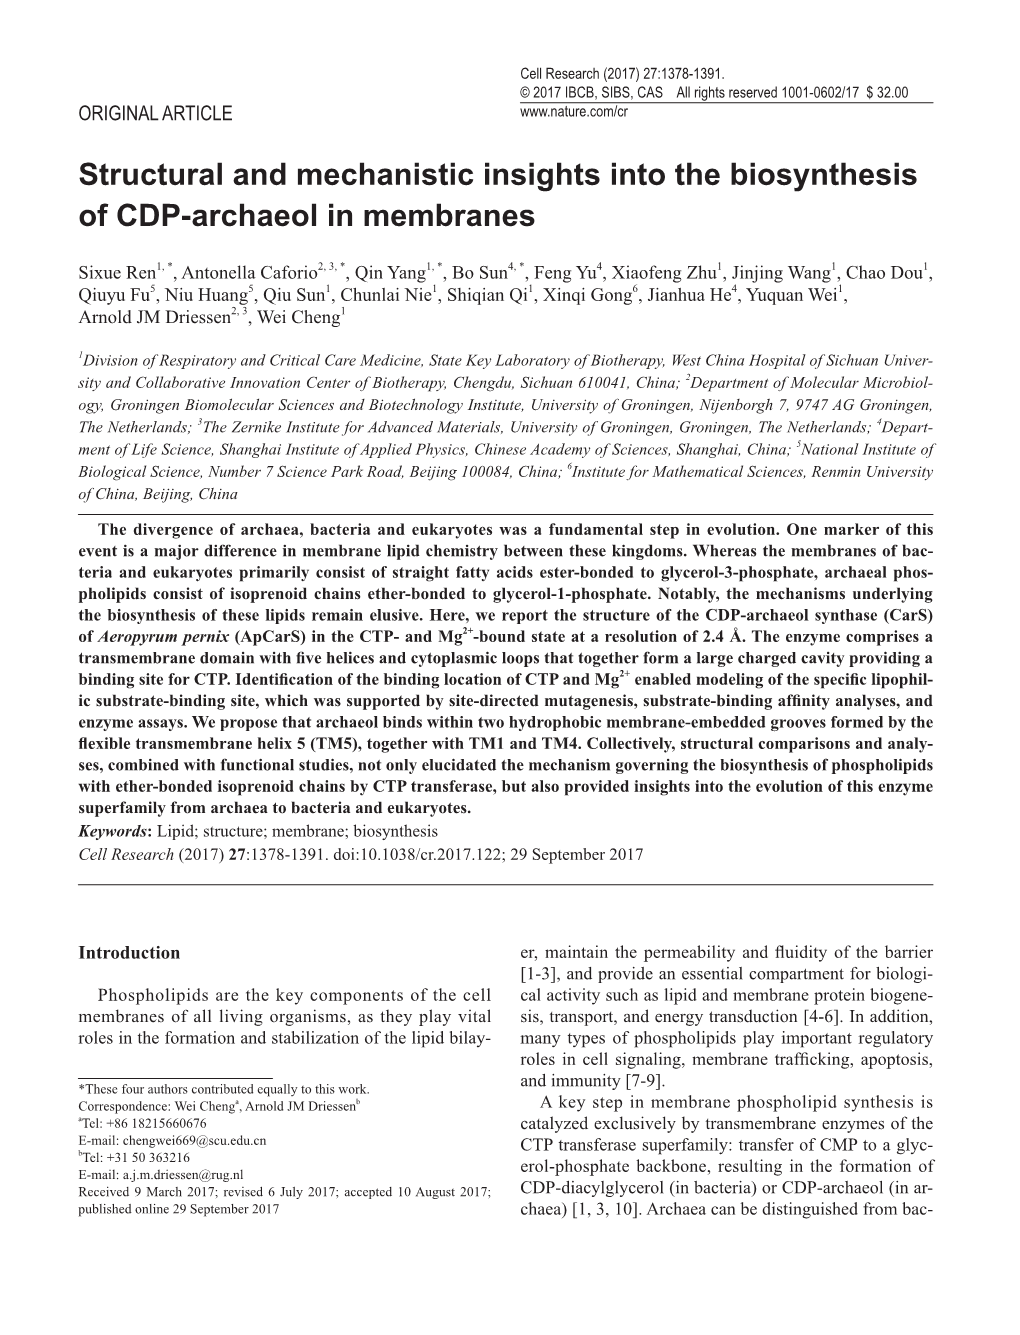 Structural and Mechanistic Insights Into the Biosynthesis of CDP-Archaeol in Membranes